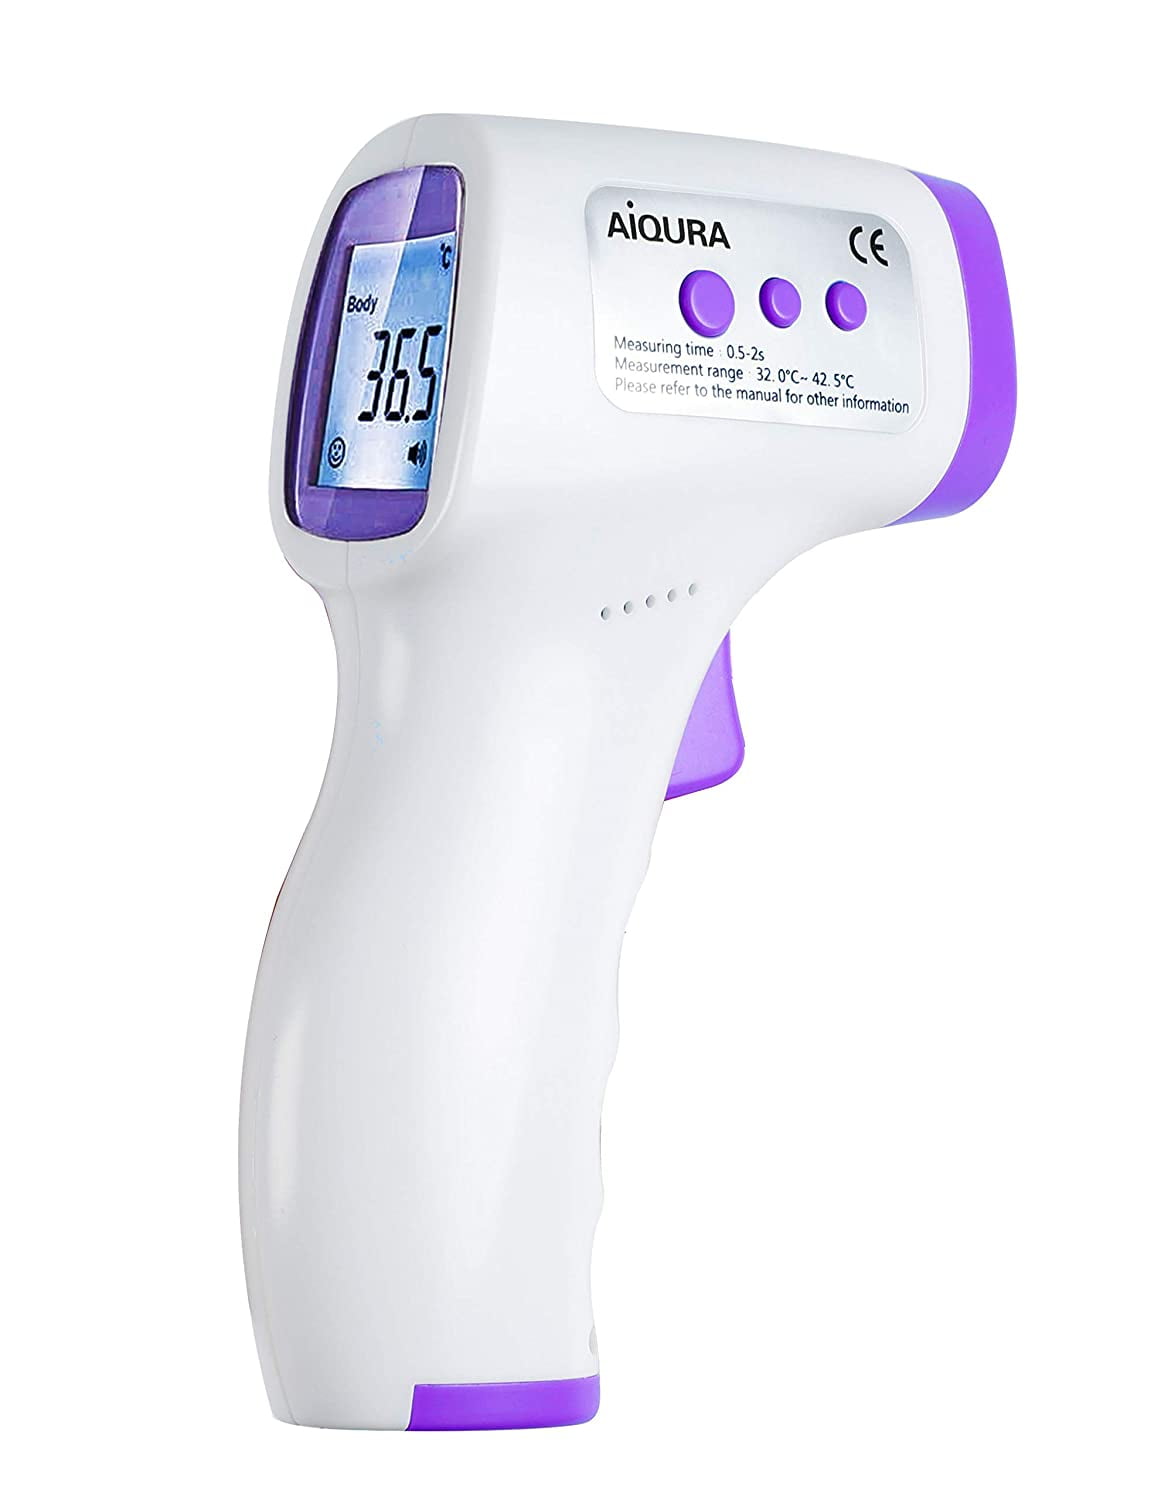 Digital Infrared Thermometer Instant Accurate Result Infants Kids & Adults Non-Contact Smart Scanning Technology Model No IR 988 Forehead & Body Temperature Measurement with LCD Display & Alarm